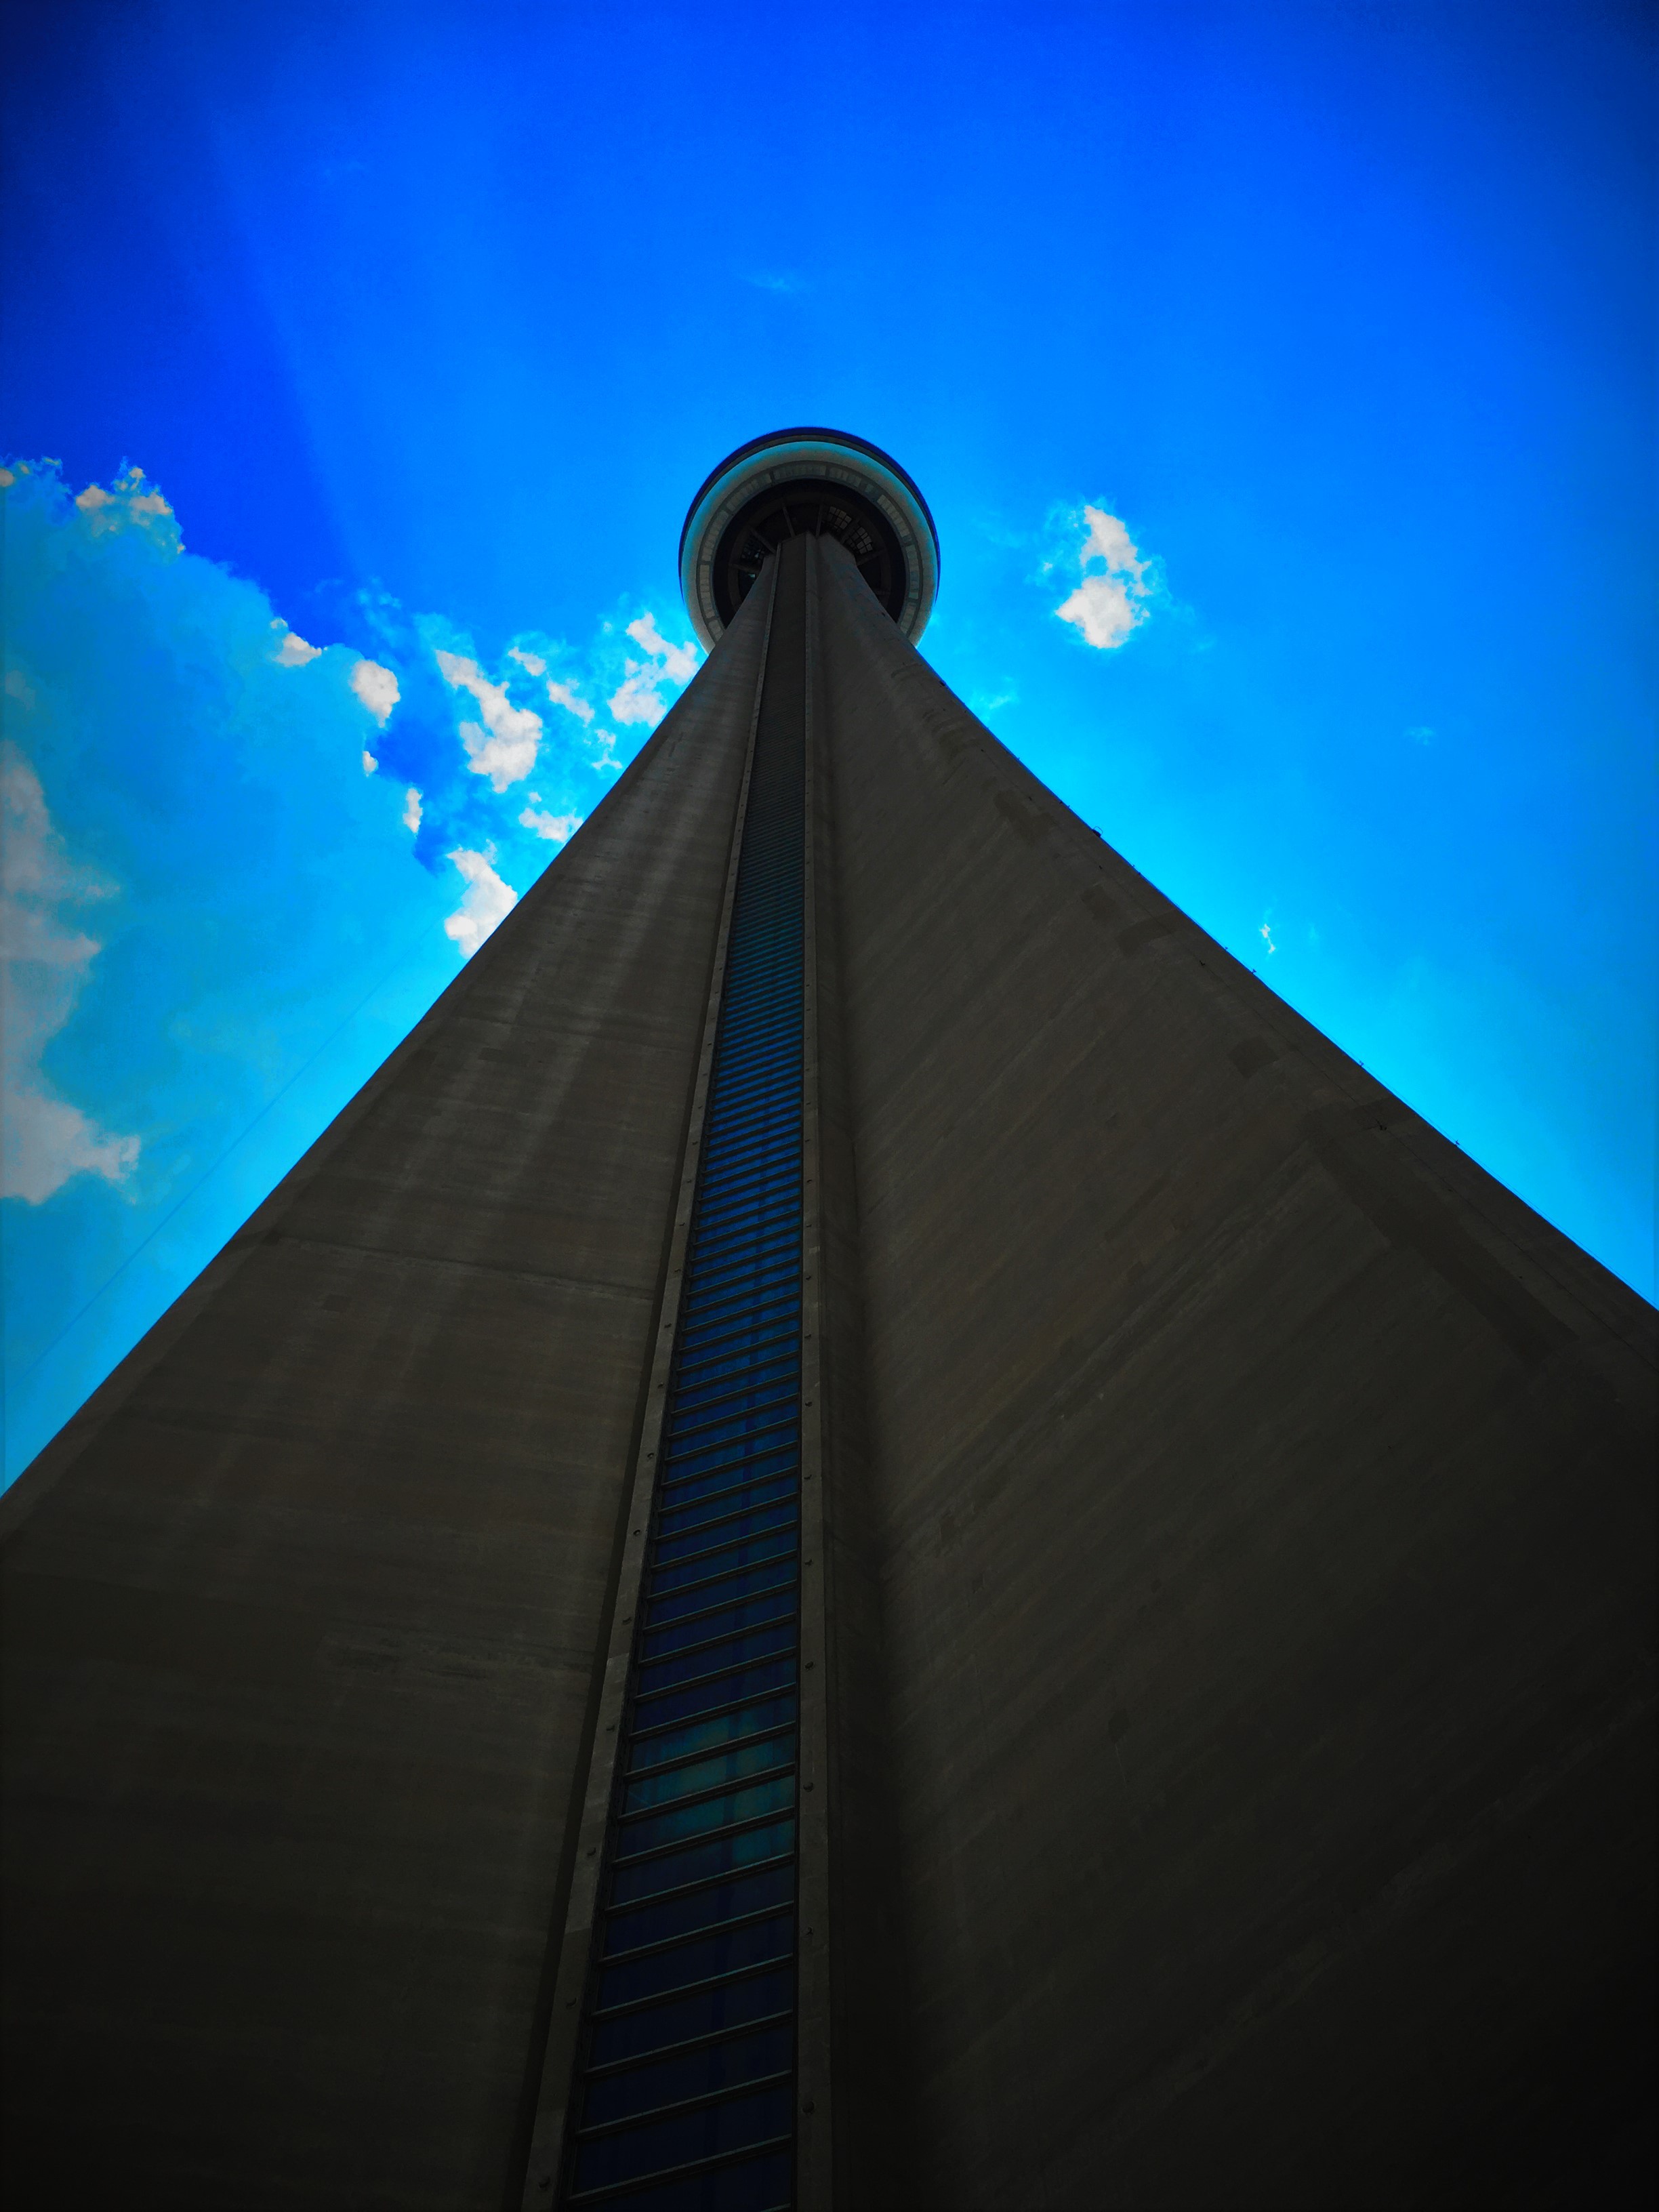 General 2448x3264 worm's eye view sky building bottom view tower low-angle